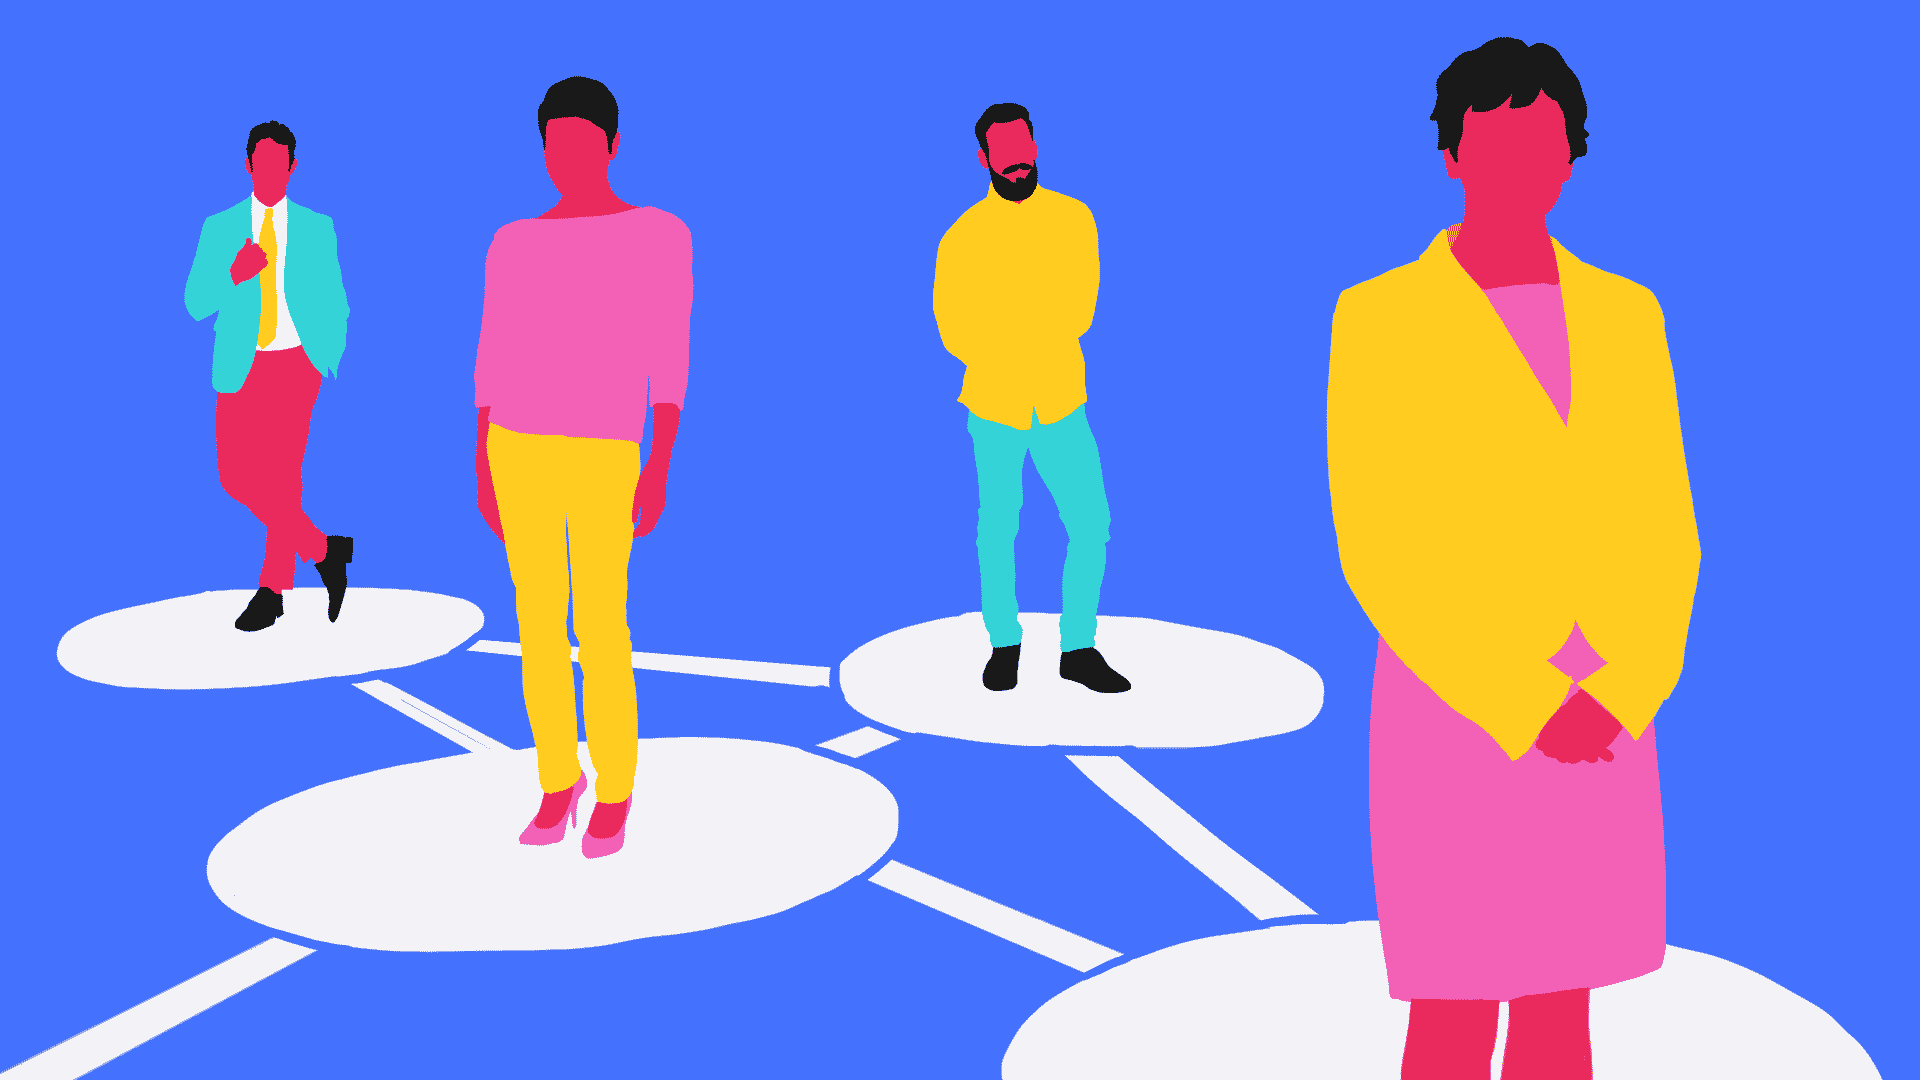 Illustration of a network of people standing on platforms to illustrate networking and how to make it better.